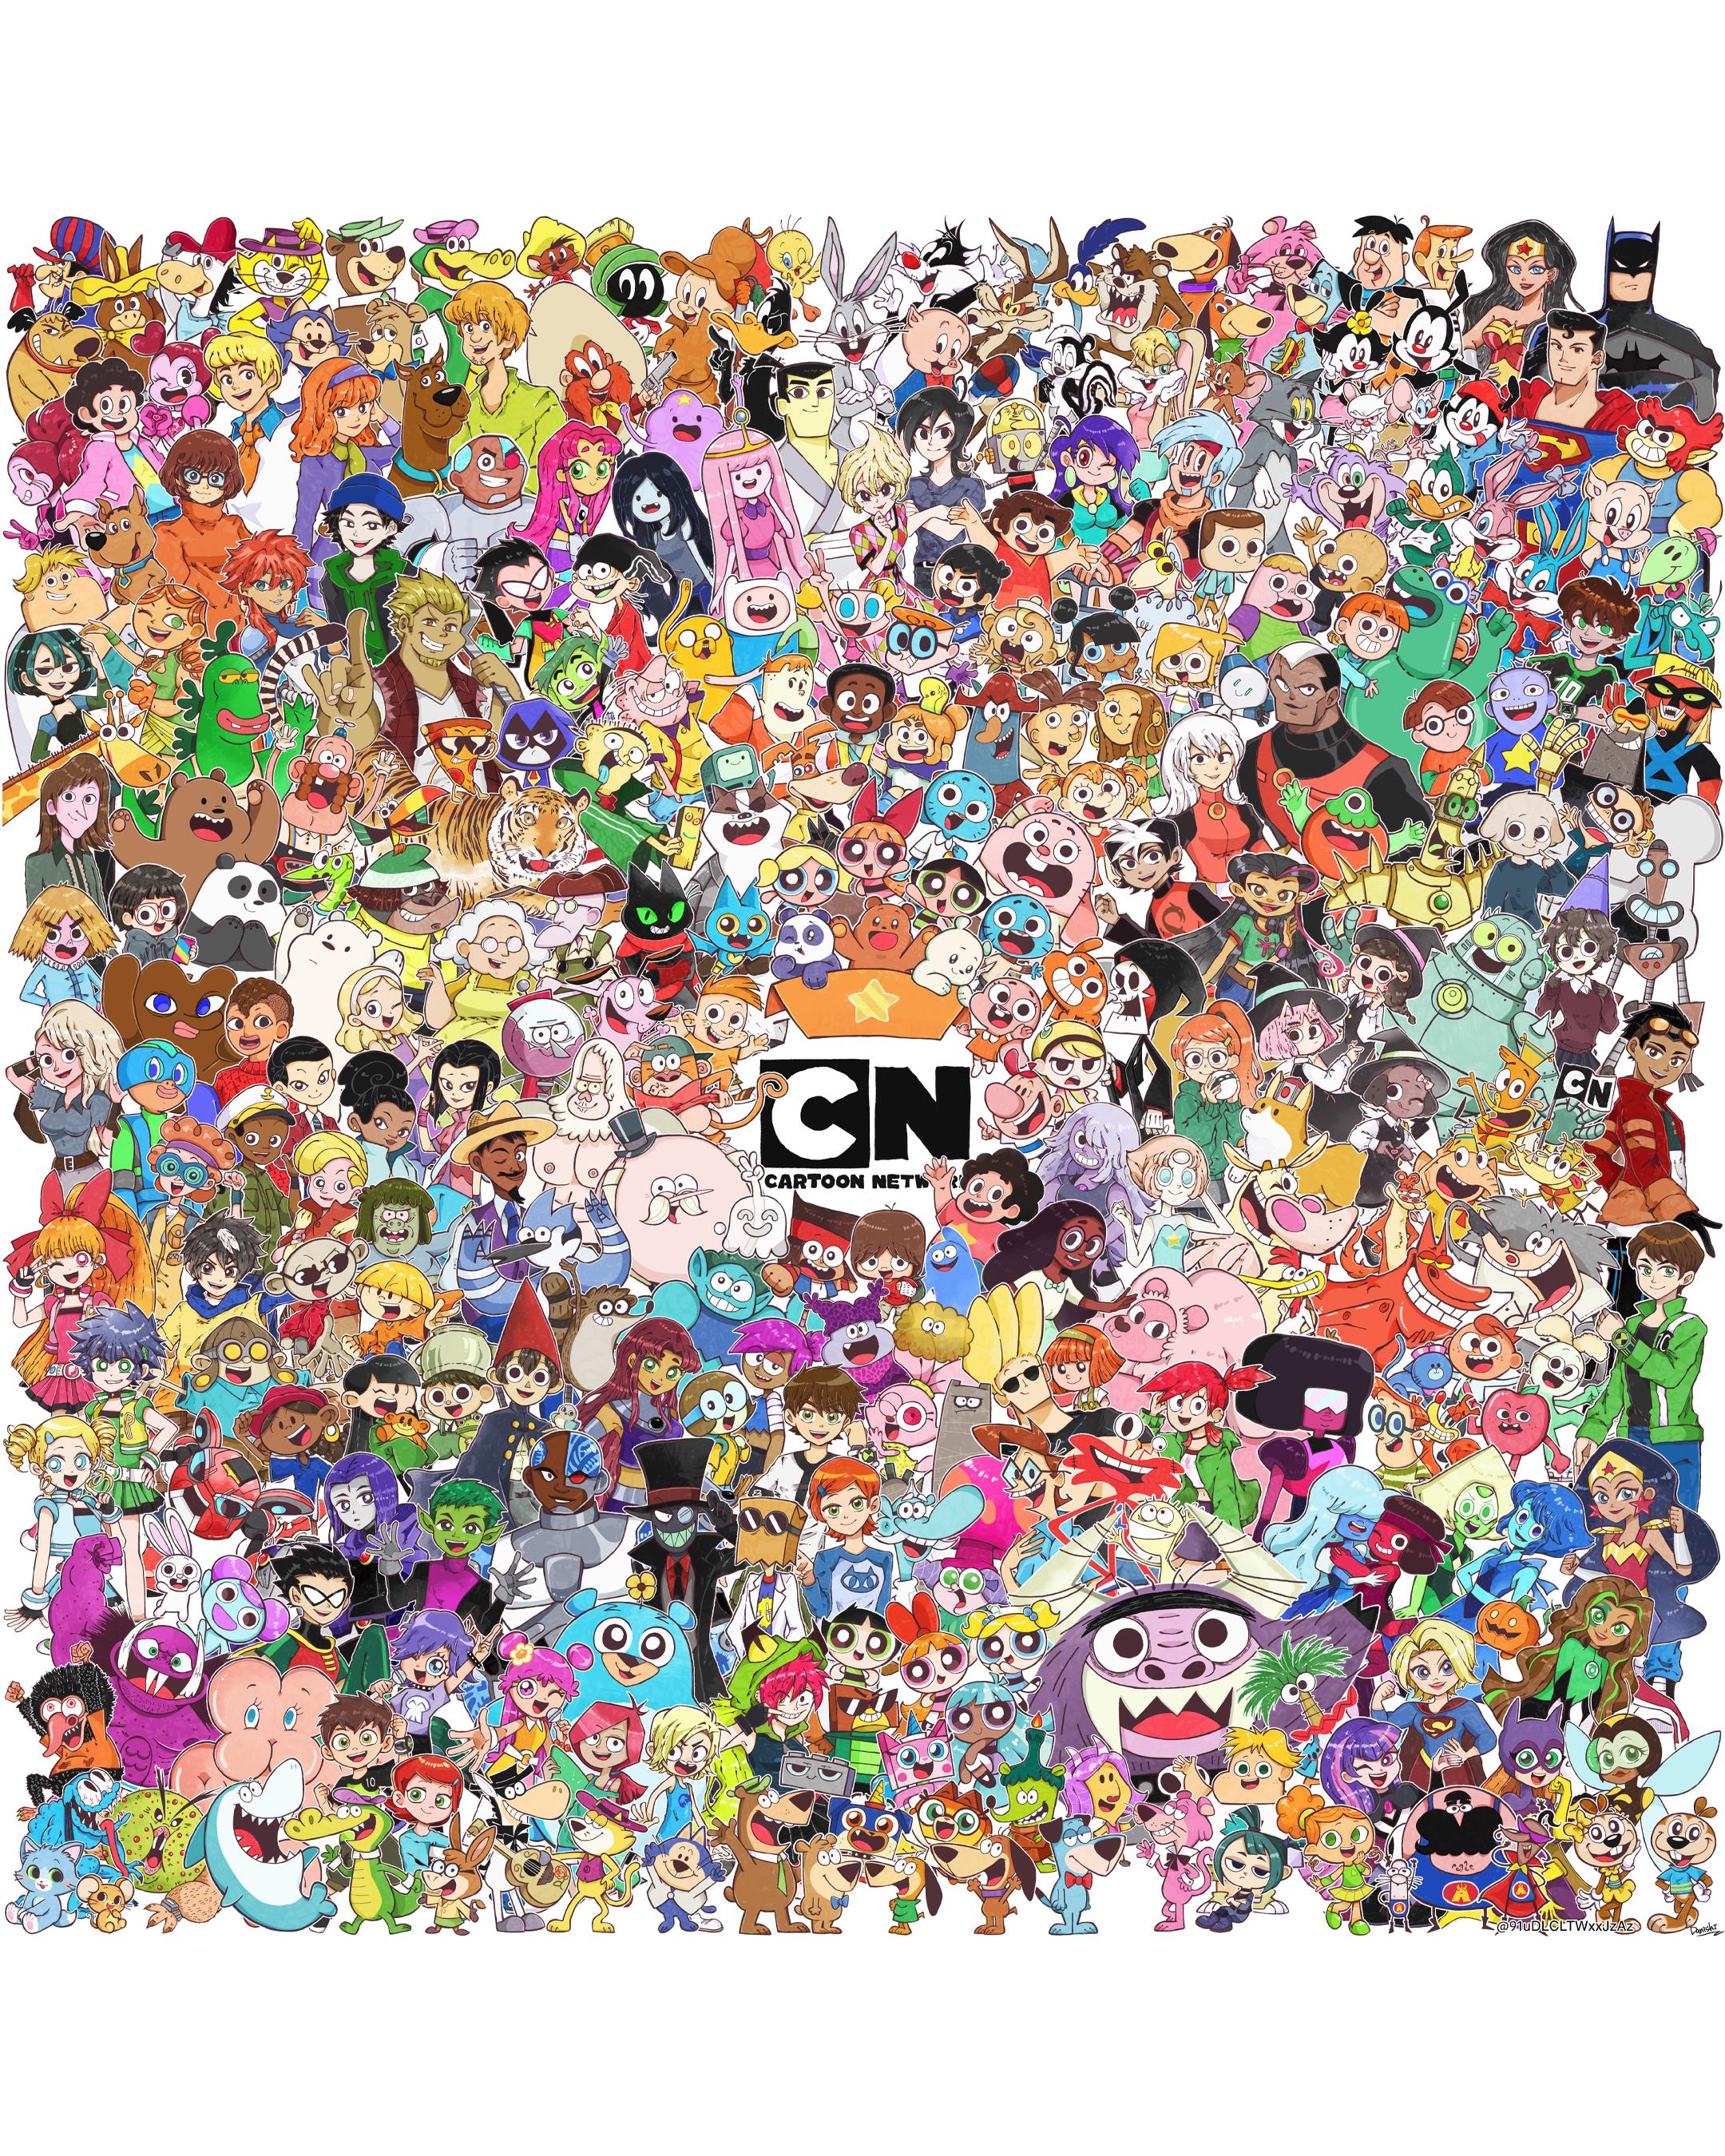 Cartoon Network on X: OK but the dedication though 👏😱💗 Can you count  how many characters are in this fan art? 🎨: @91uDLCLTWxxJzAz # Cartoonnetwork #Fanart #Fanartfriday #90scartoons #2000scartoons #oldschool  #throwback  /